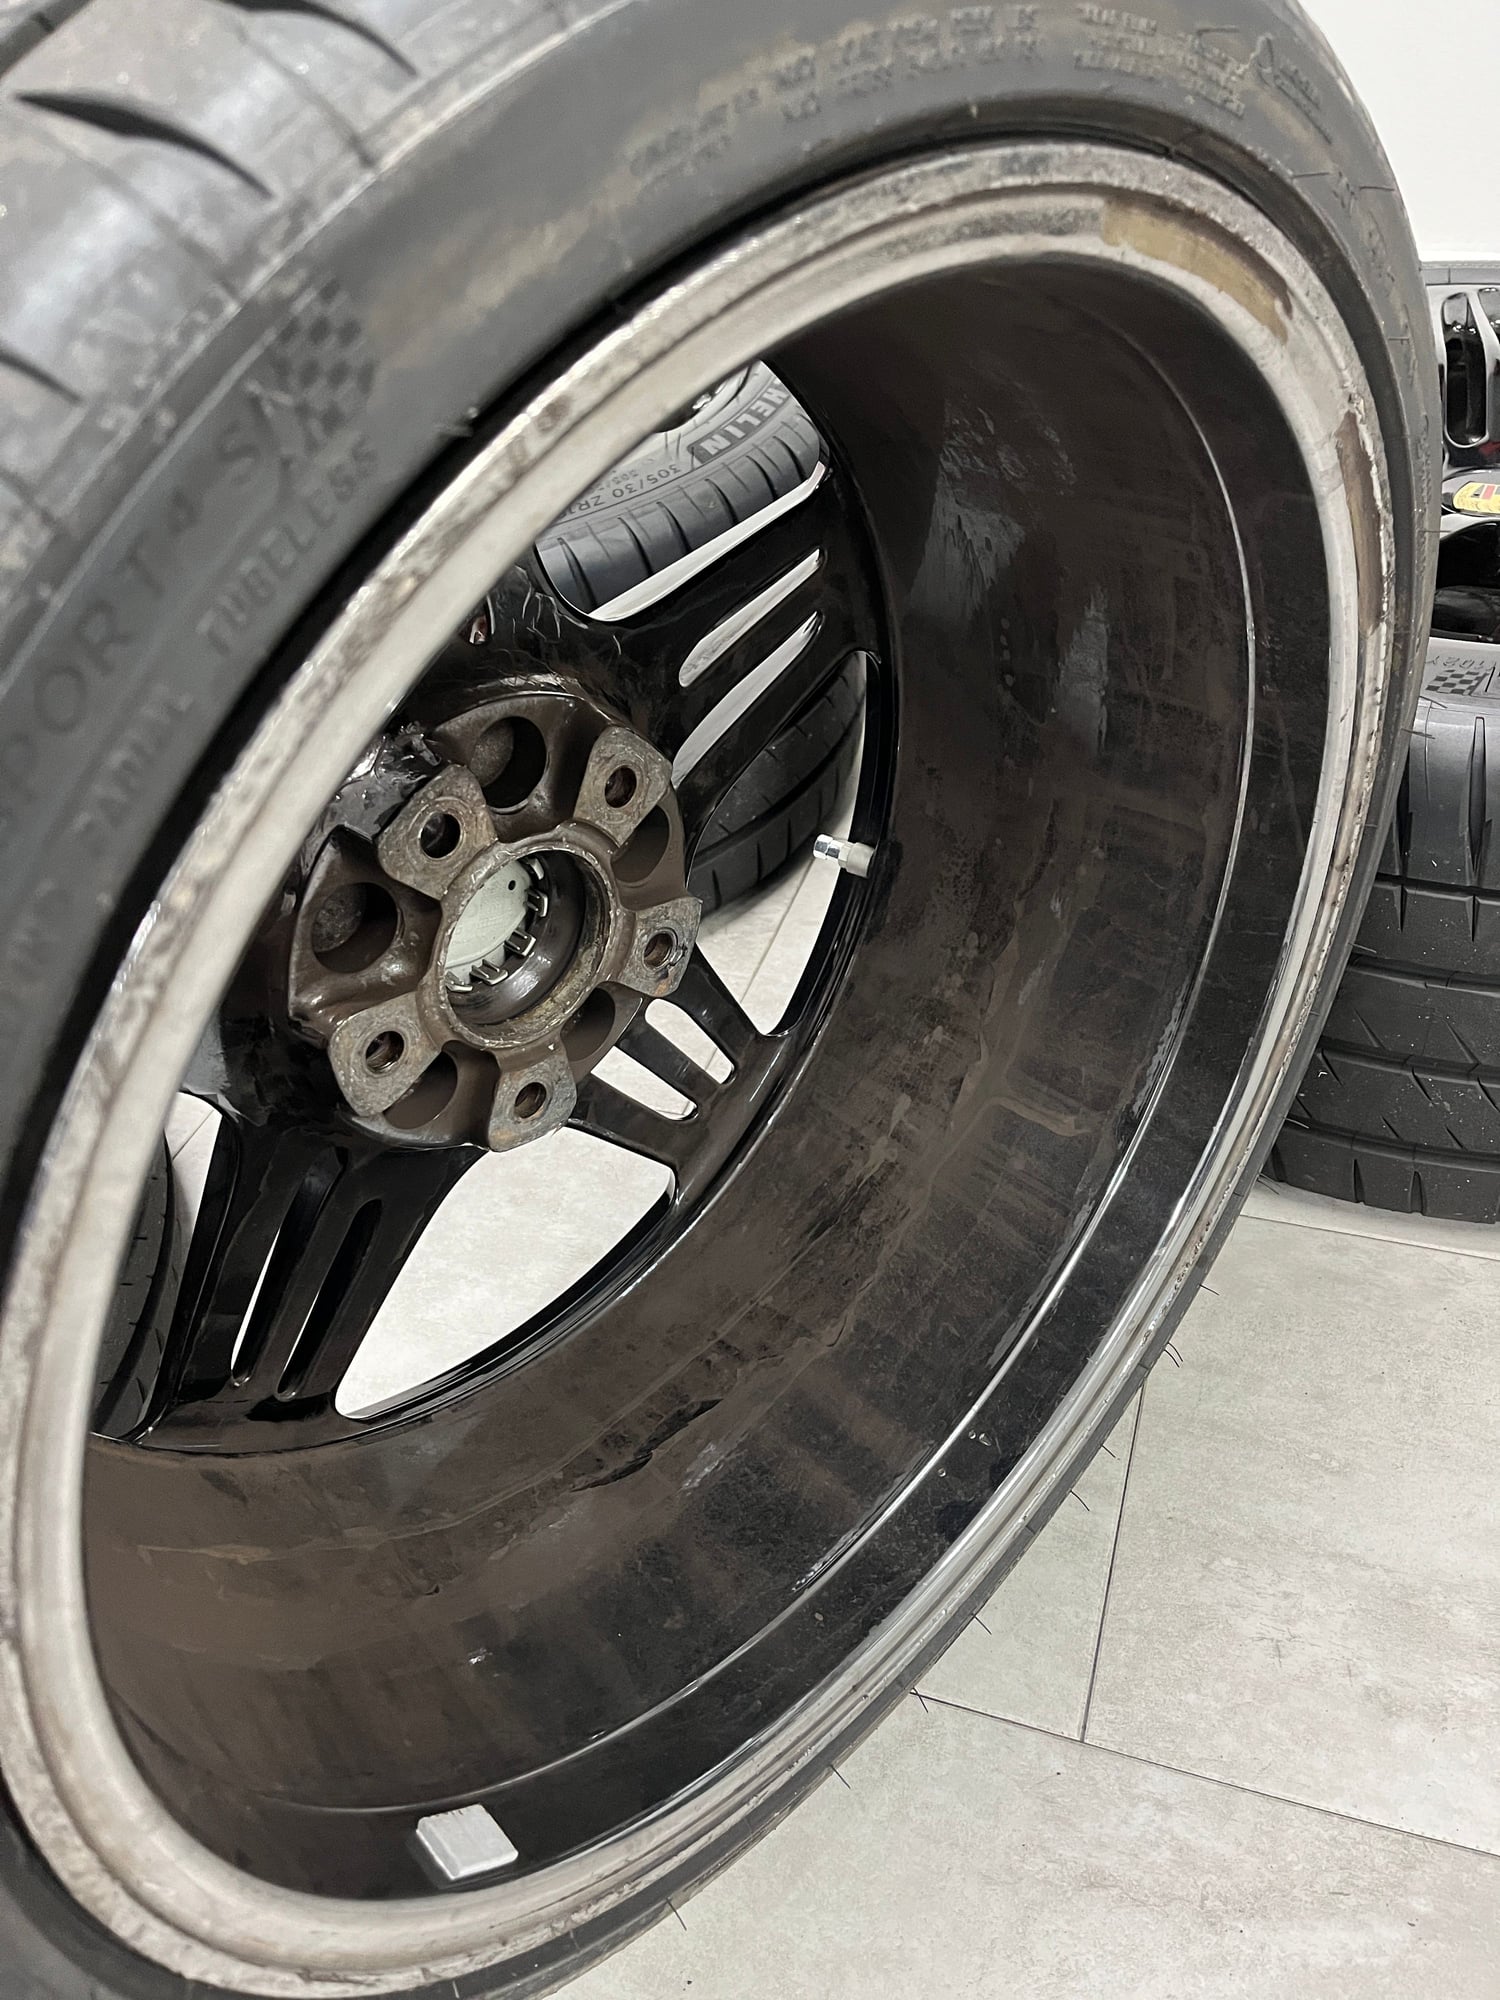 Wheels and Tires/Axles - Black 997.1 Turbo Wheels + New PS4S Tires + New TPMS - Used - 2007 to 2009 Porsche 911 - Fairfax, VA 22031, United States